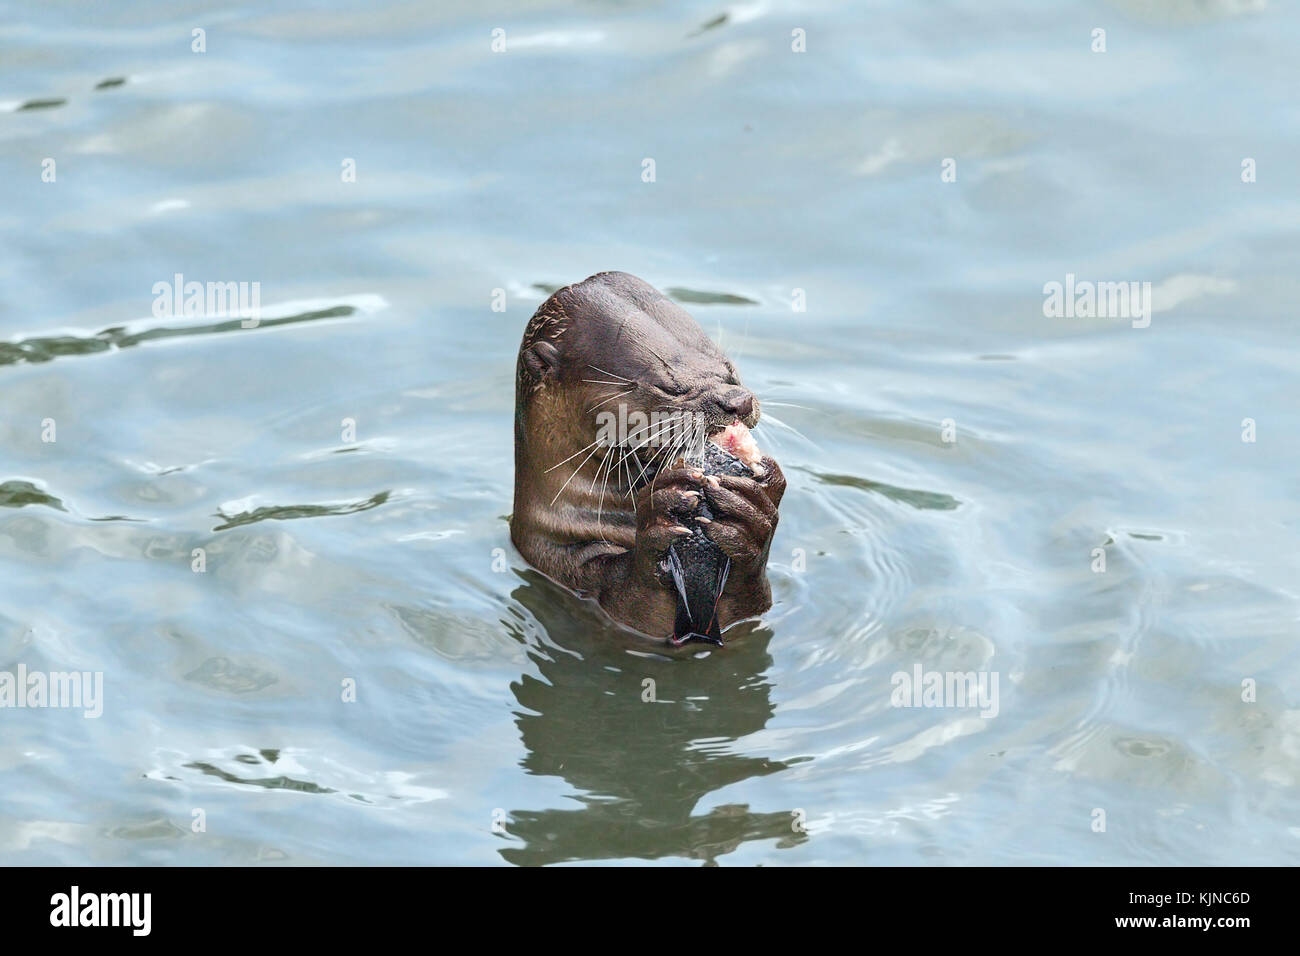 Smooth-coated otter (Lutrogale perspicillata), Singapore Stock Photo